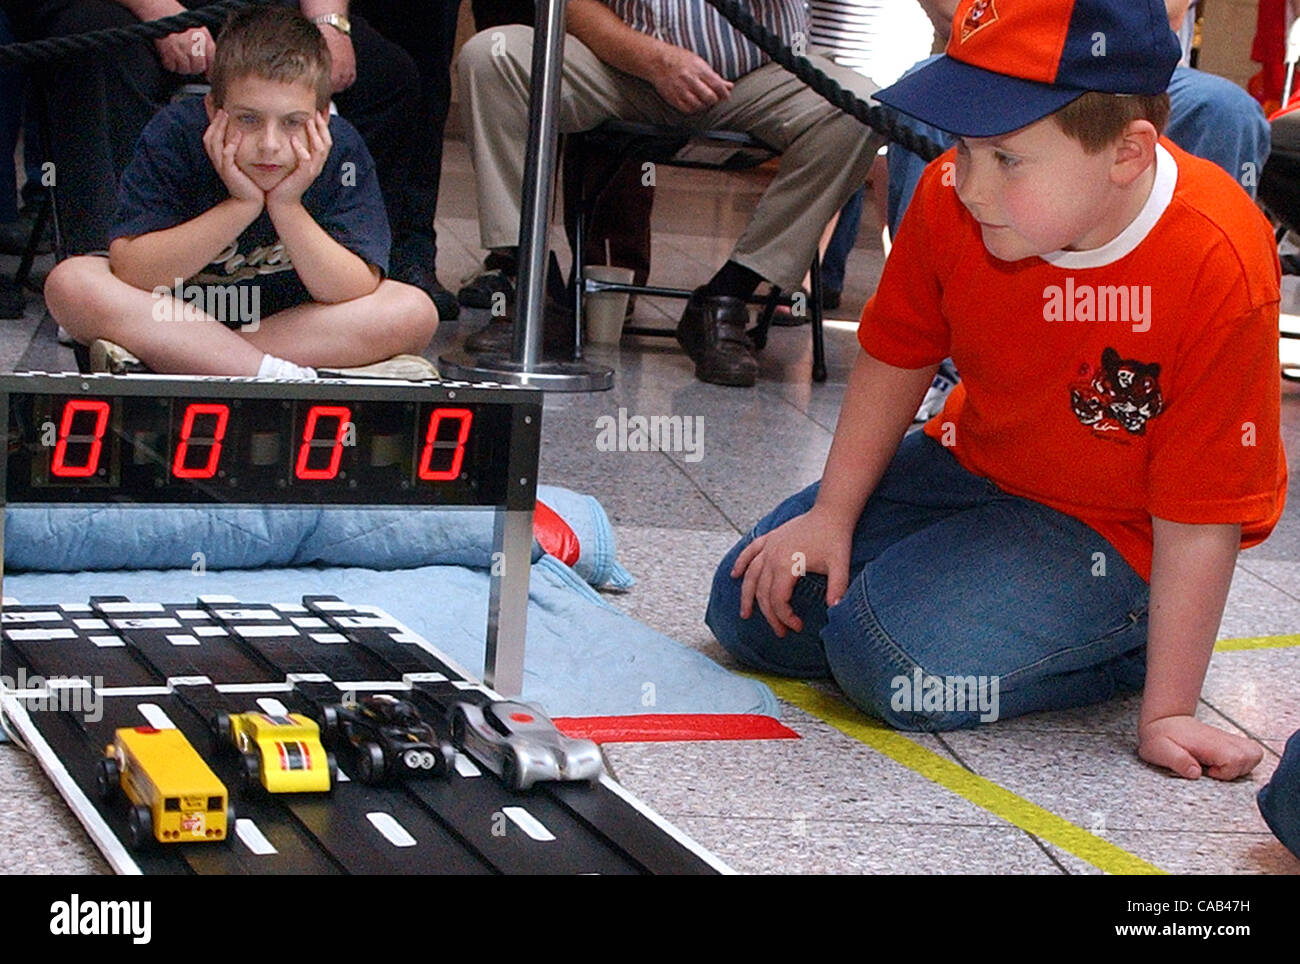 Meet the dads who can't quit pinewood derby racing—even after